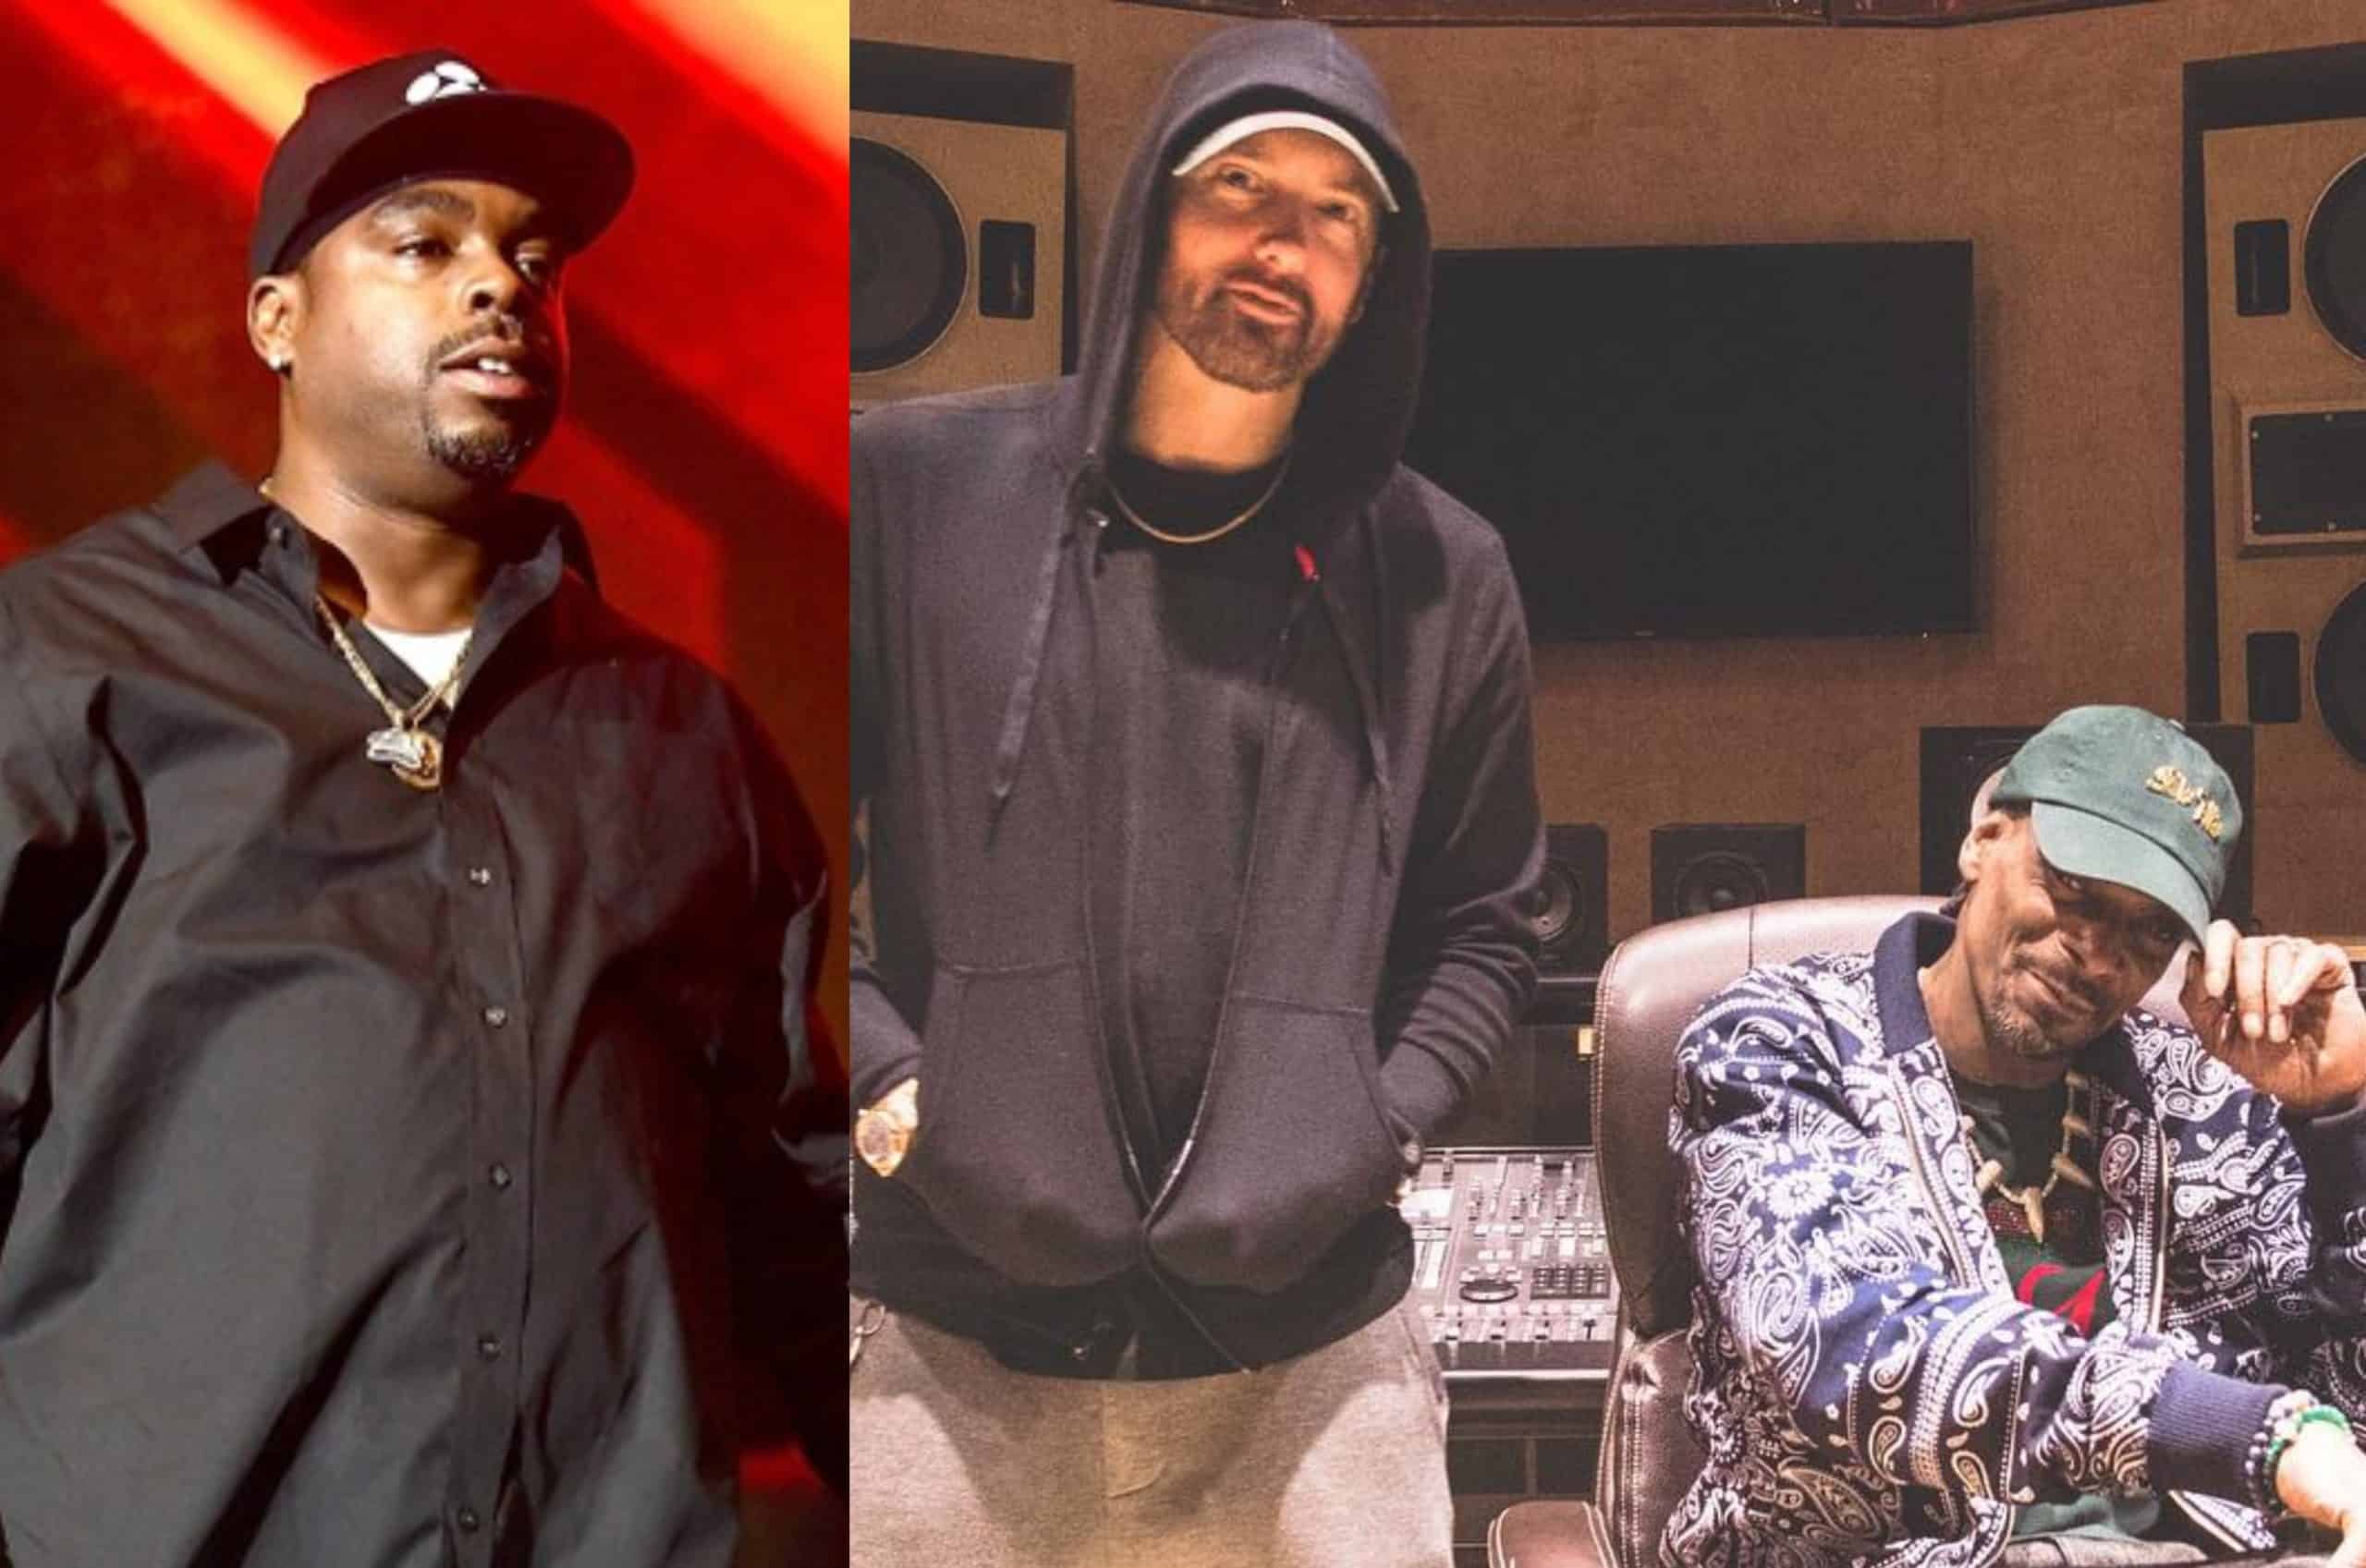 Daz Dillinger Reacts to Eminem Dissing Snoop Dogg on New Album